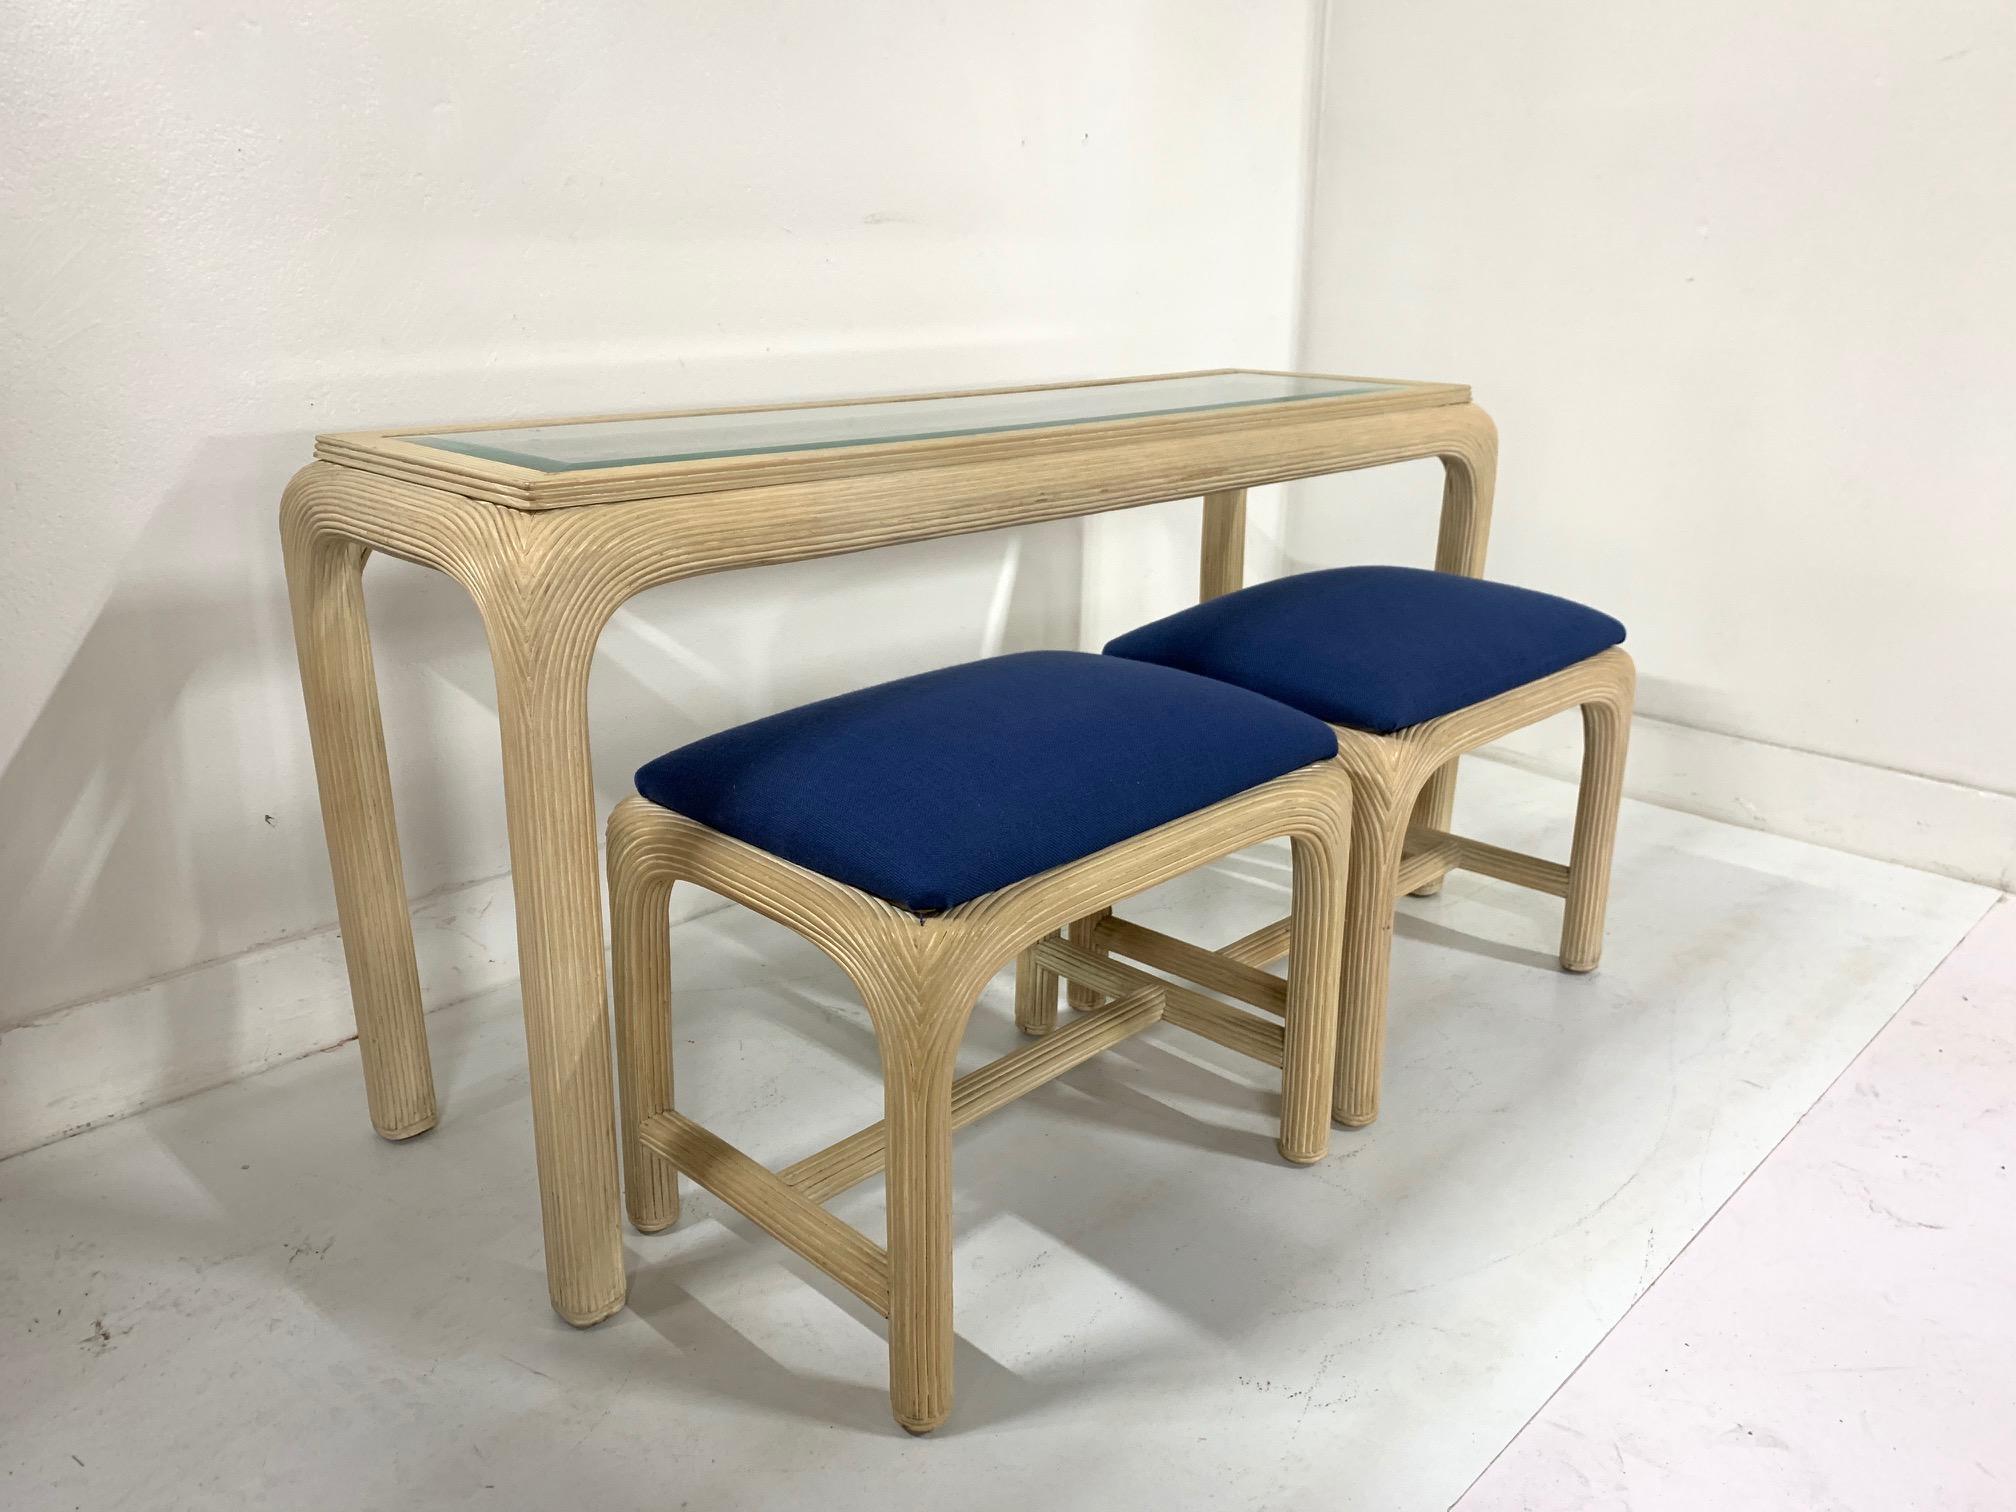 Modern console table with matching benches. The set has a reed frame, a glass beveled top, and matching blue upholstered benches.
Measures: Console: 54 W x 18 D x 28.5 H
Benches: 22.25 W x 16 D x 20 H.